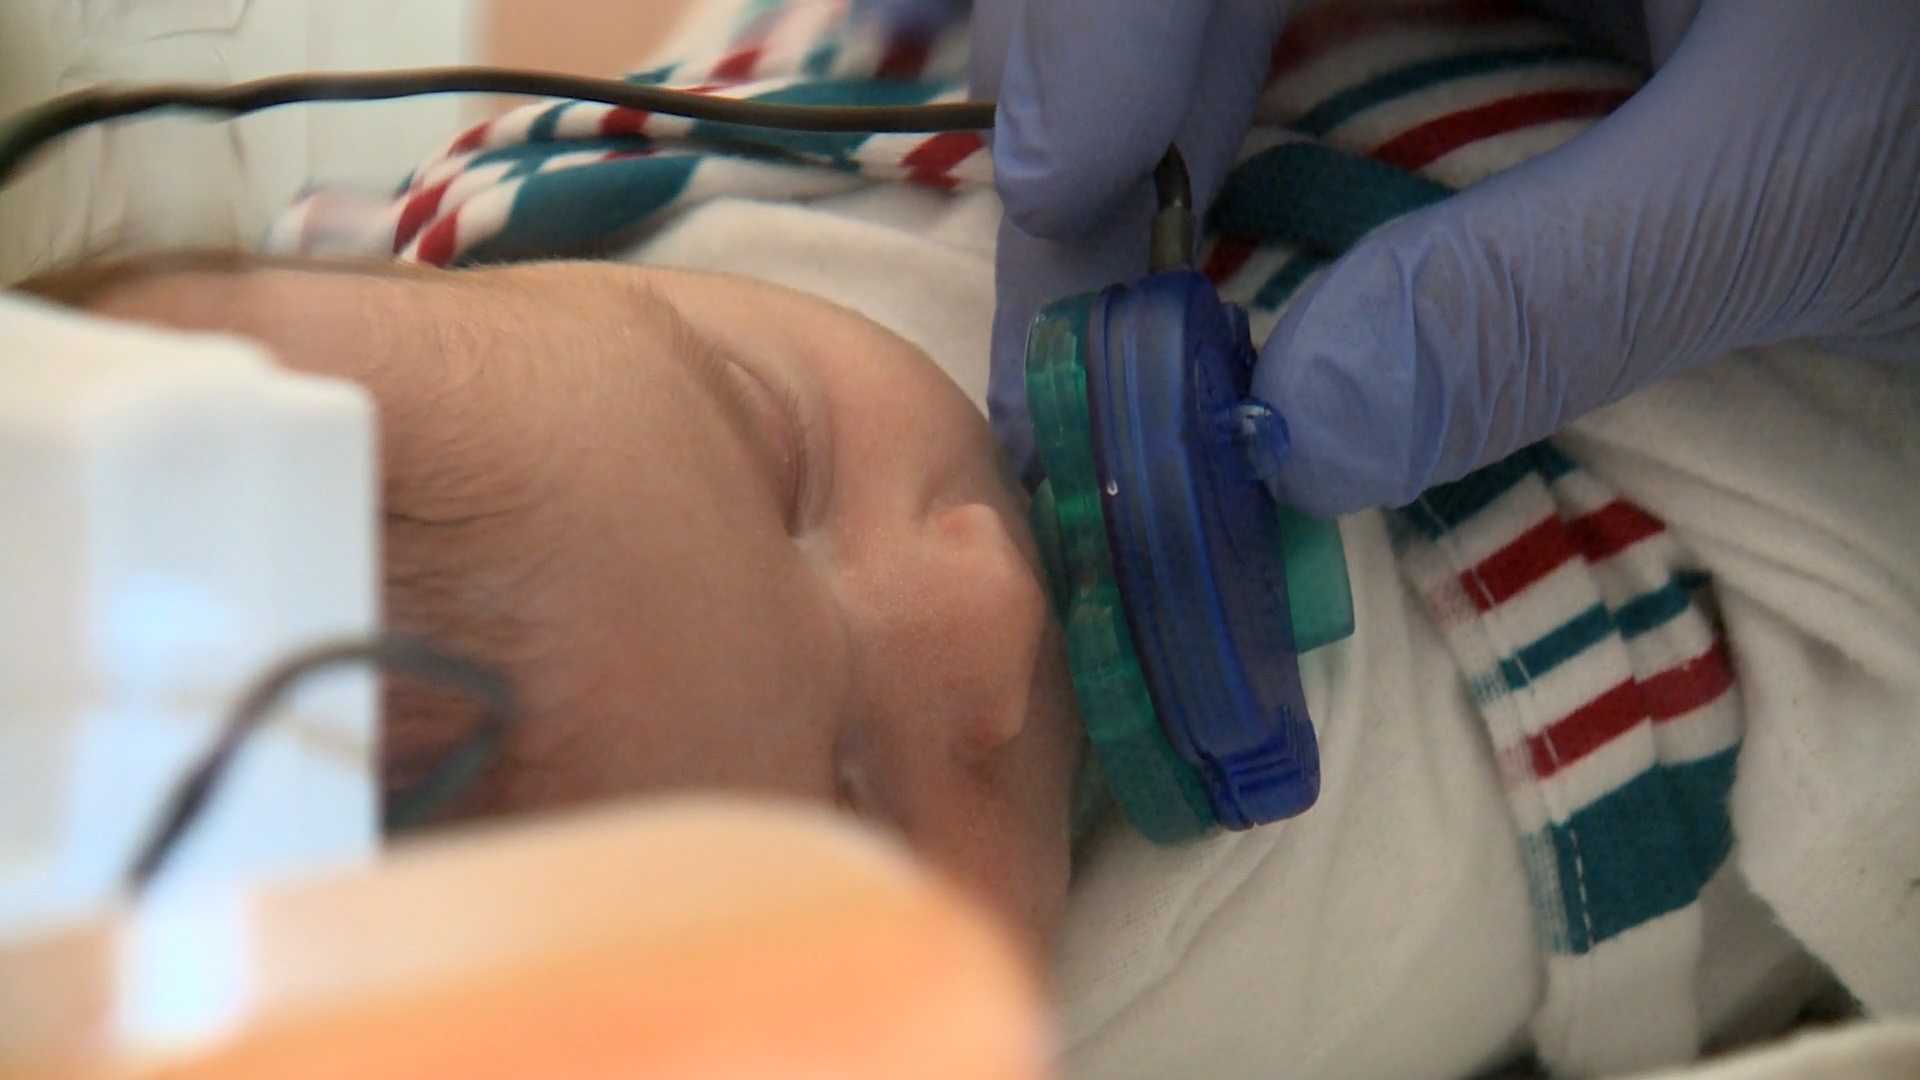 New device helps tiniest victims of the opioid crisis